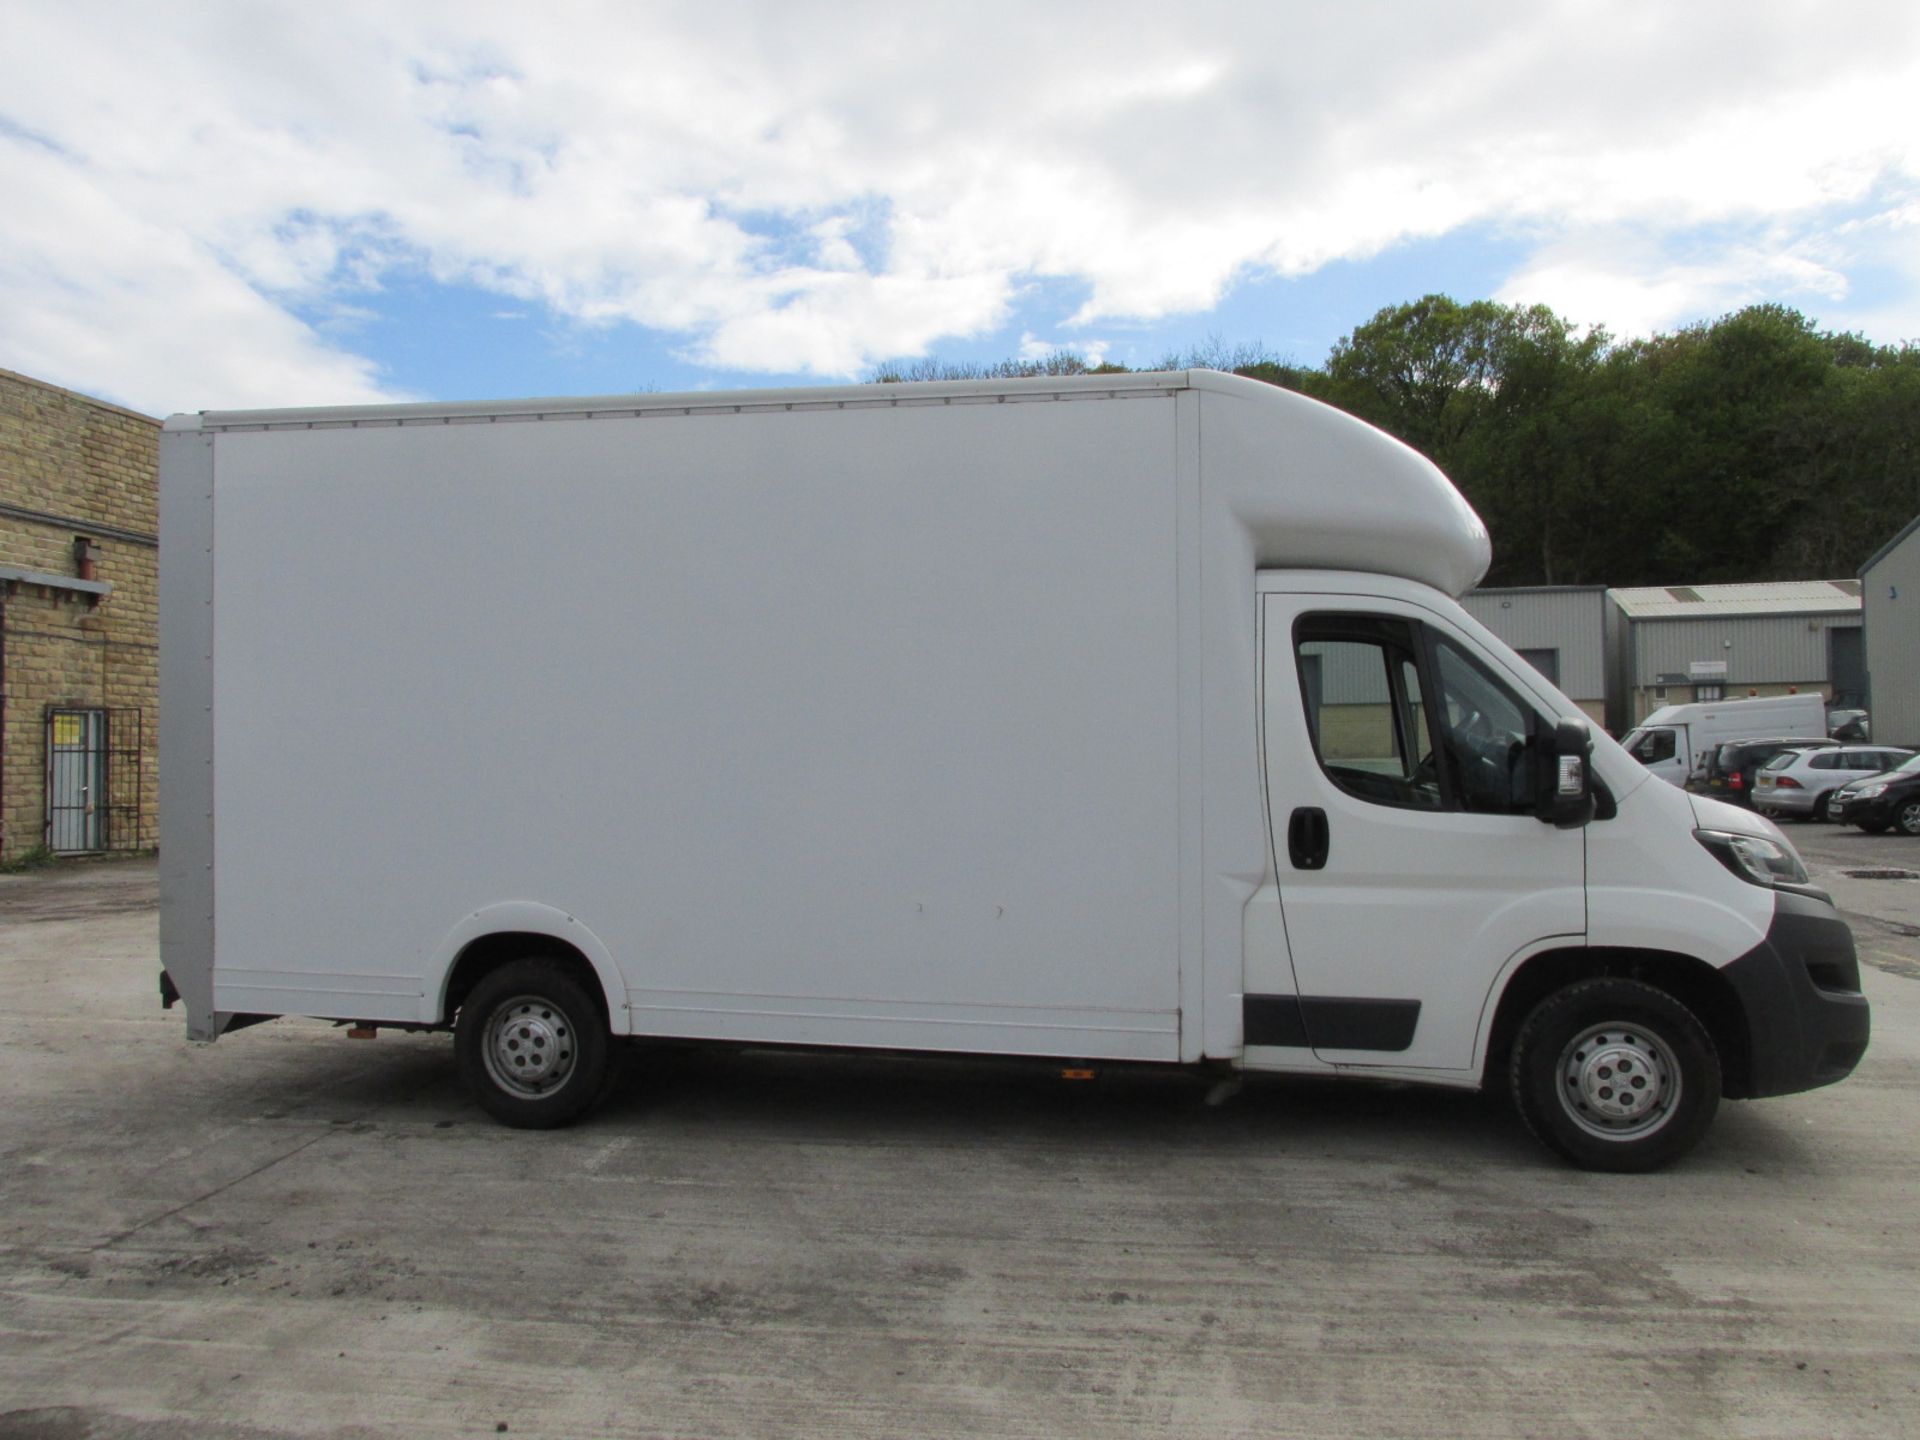 2015 "65 Reg" Peugeot Boxer 4.1m Low Loader Box Van with Dhollandia Tail Lift - over £38k when new - Image 3 of 12